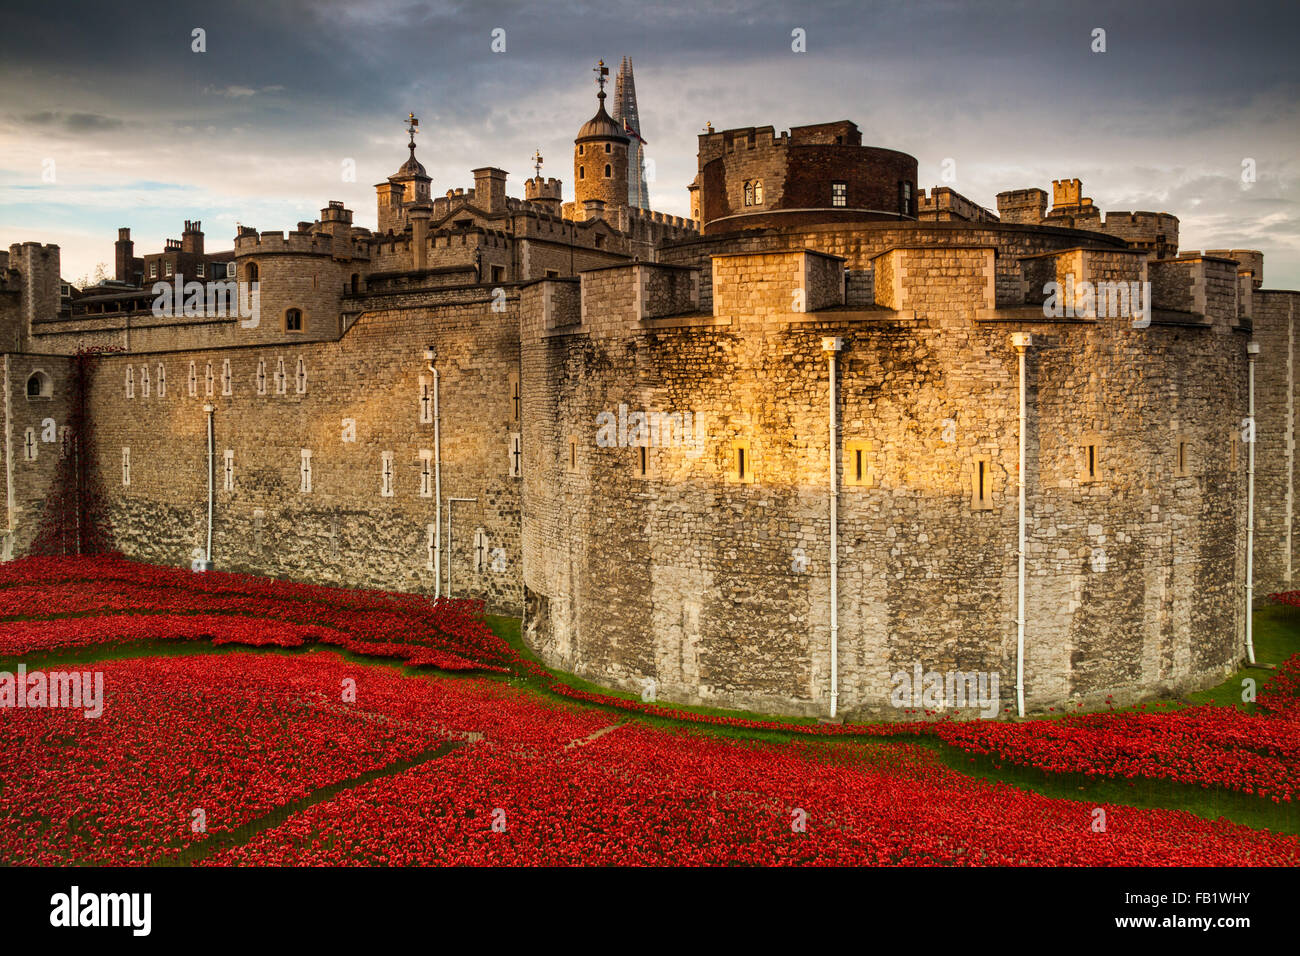 This amazing art installation of over 800000 ceramic poppies at the Tower of London commemorating the 100th anniversary of WW1 Stock Photo